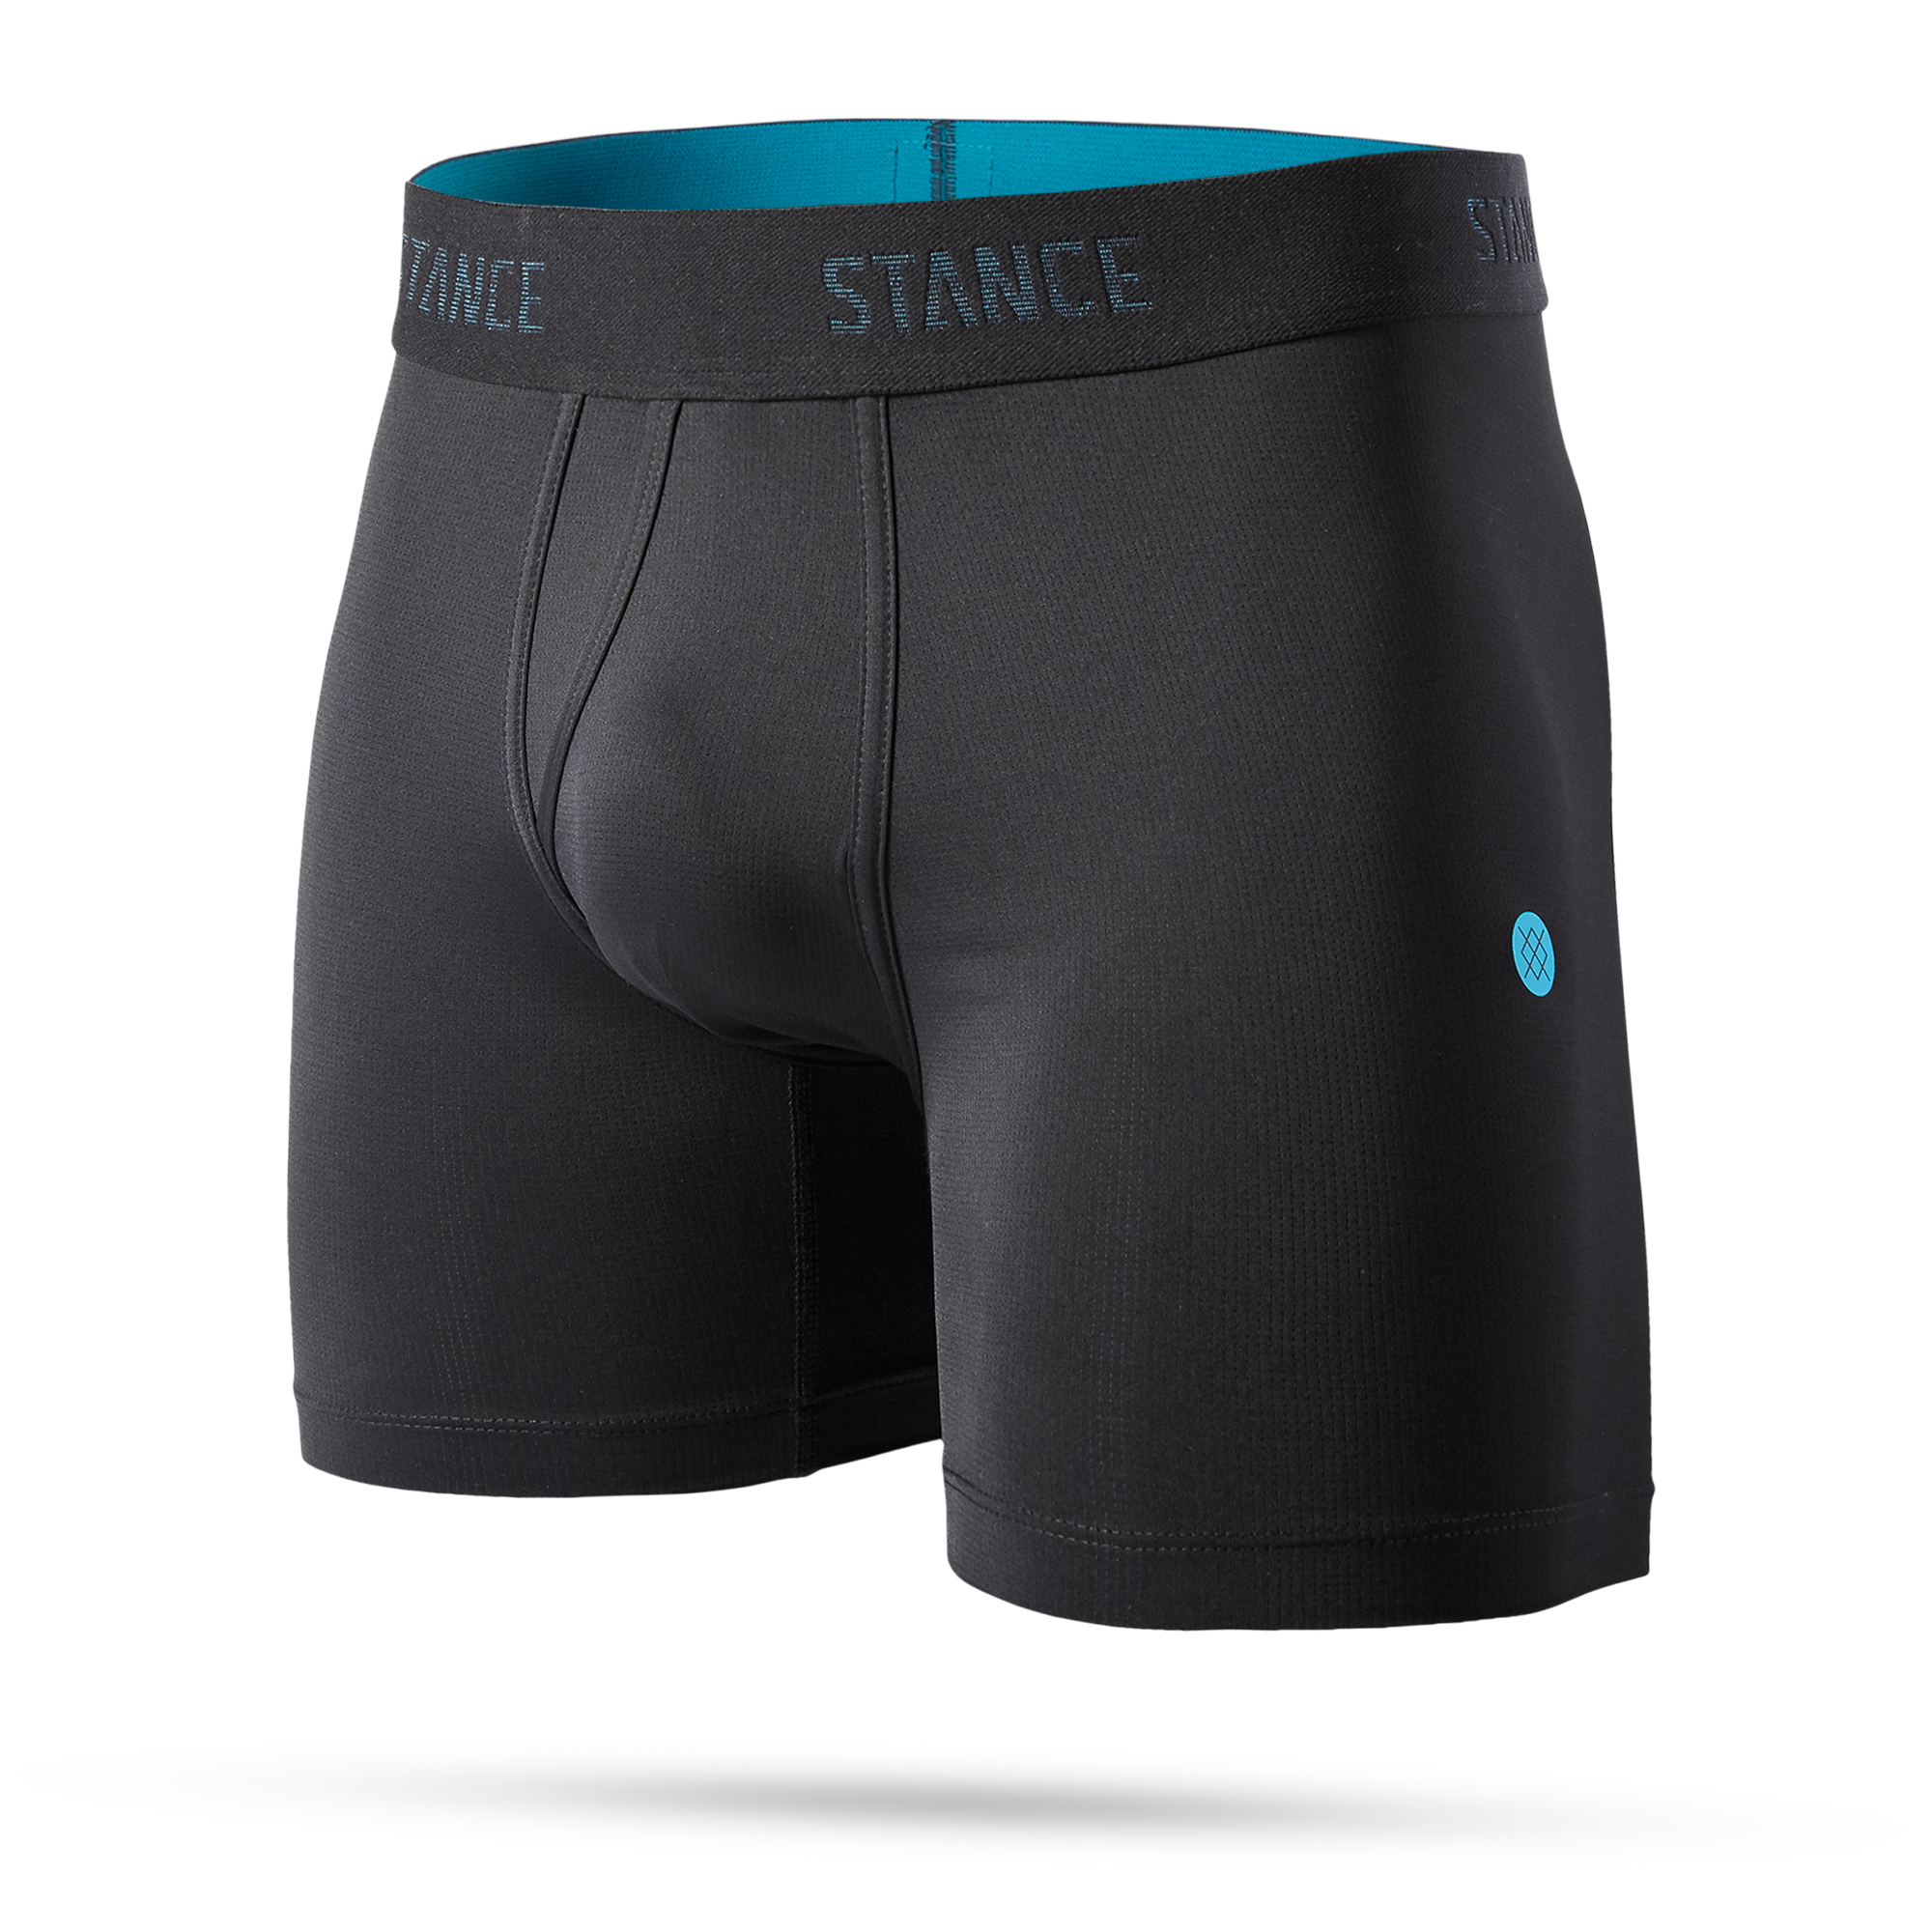 Stance Calication Boxer Brief - Brown